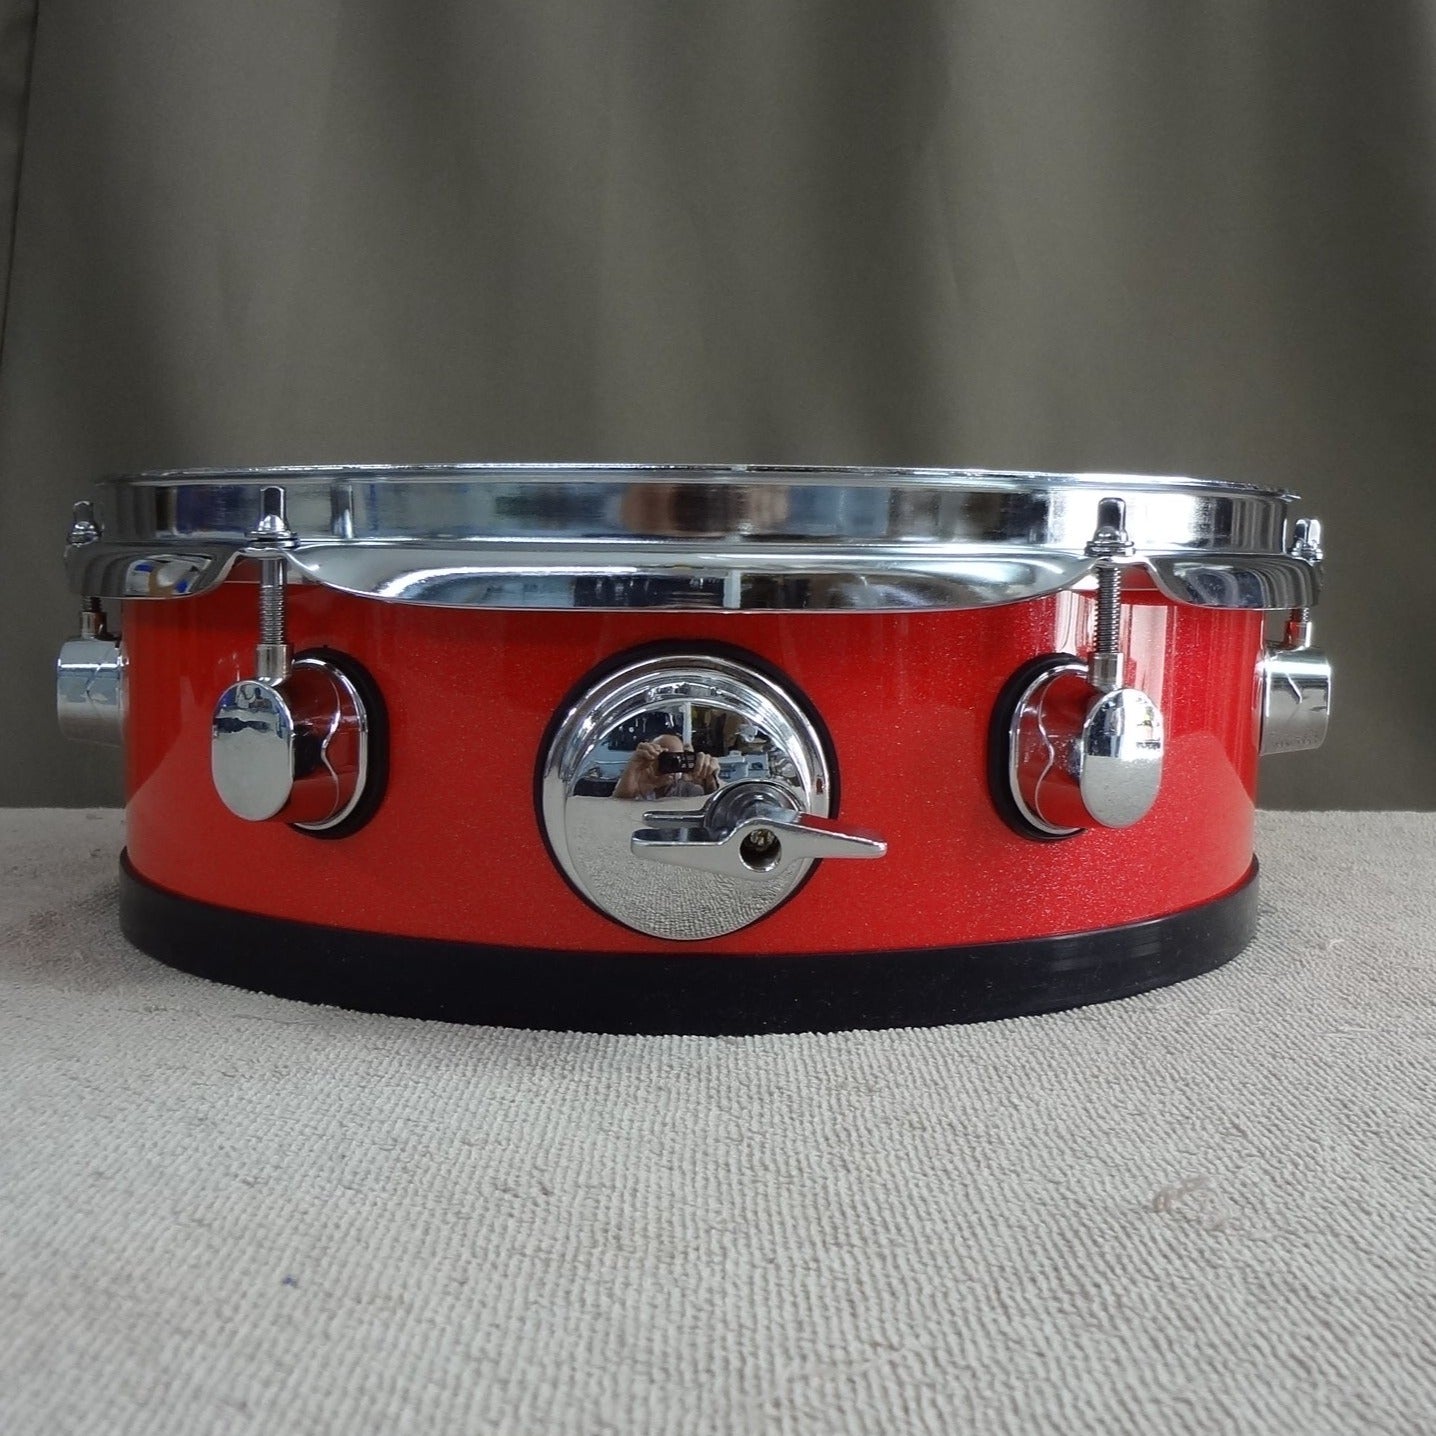 New 12 Inch Custom Electronic Snare Drum - Red with Slight Sparkle